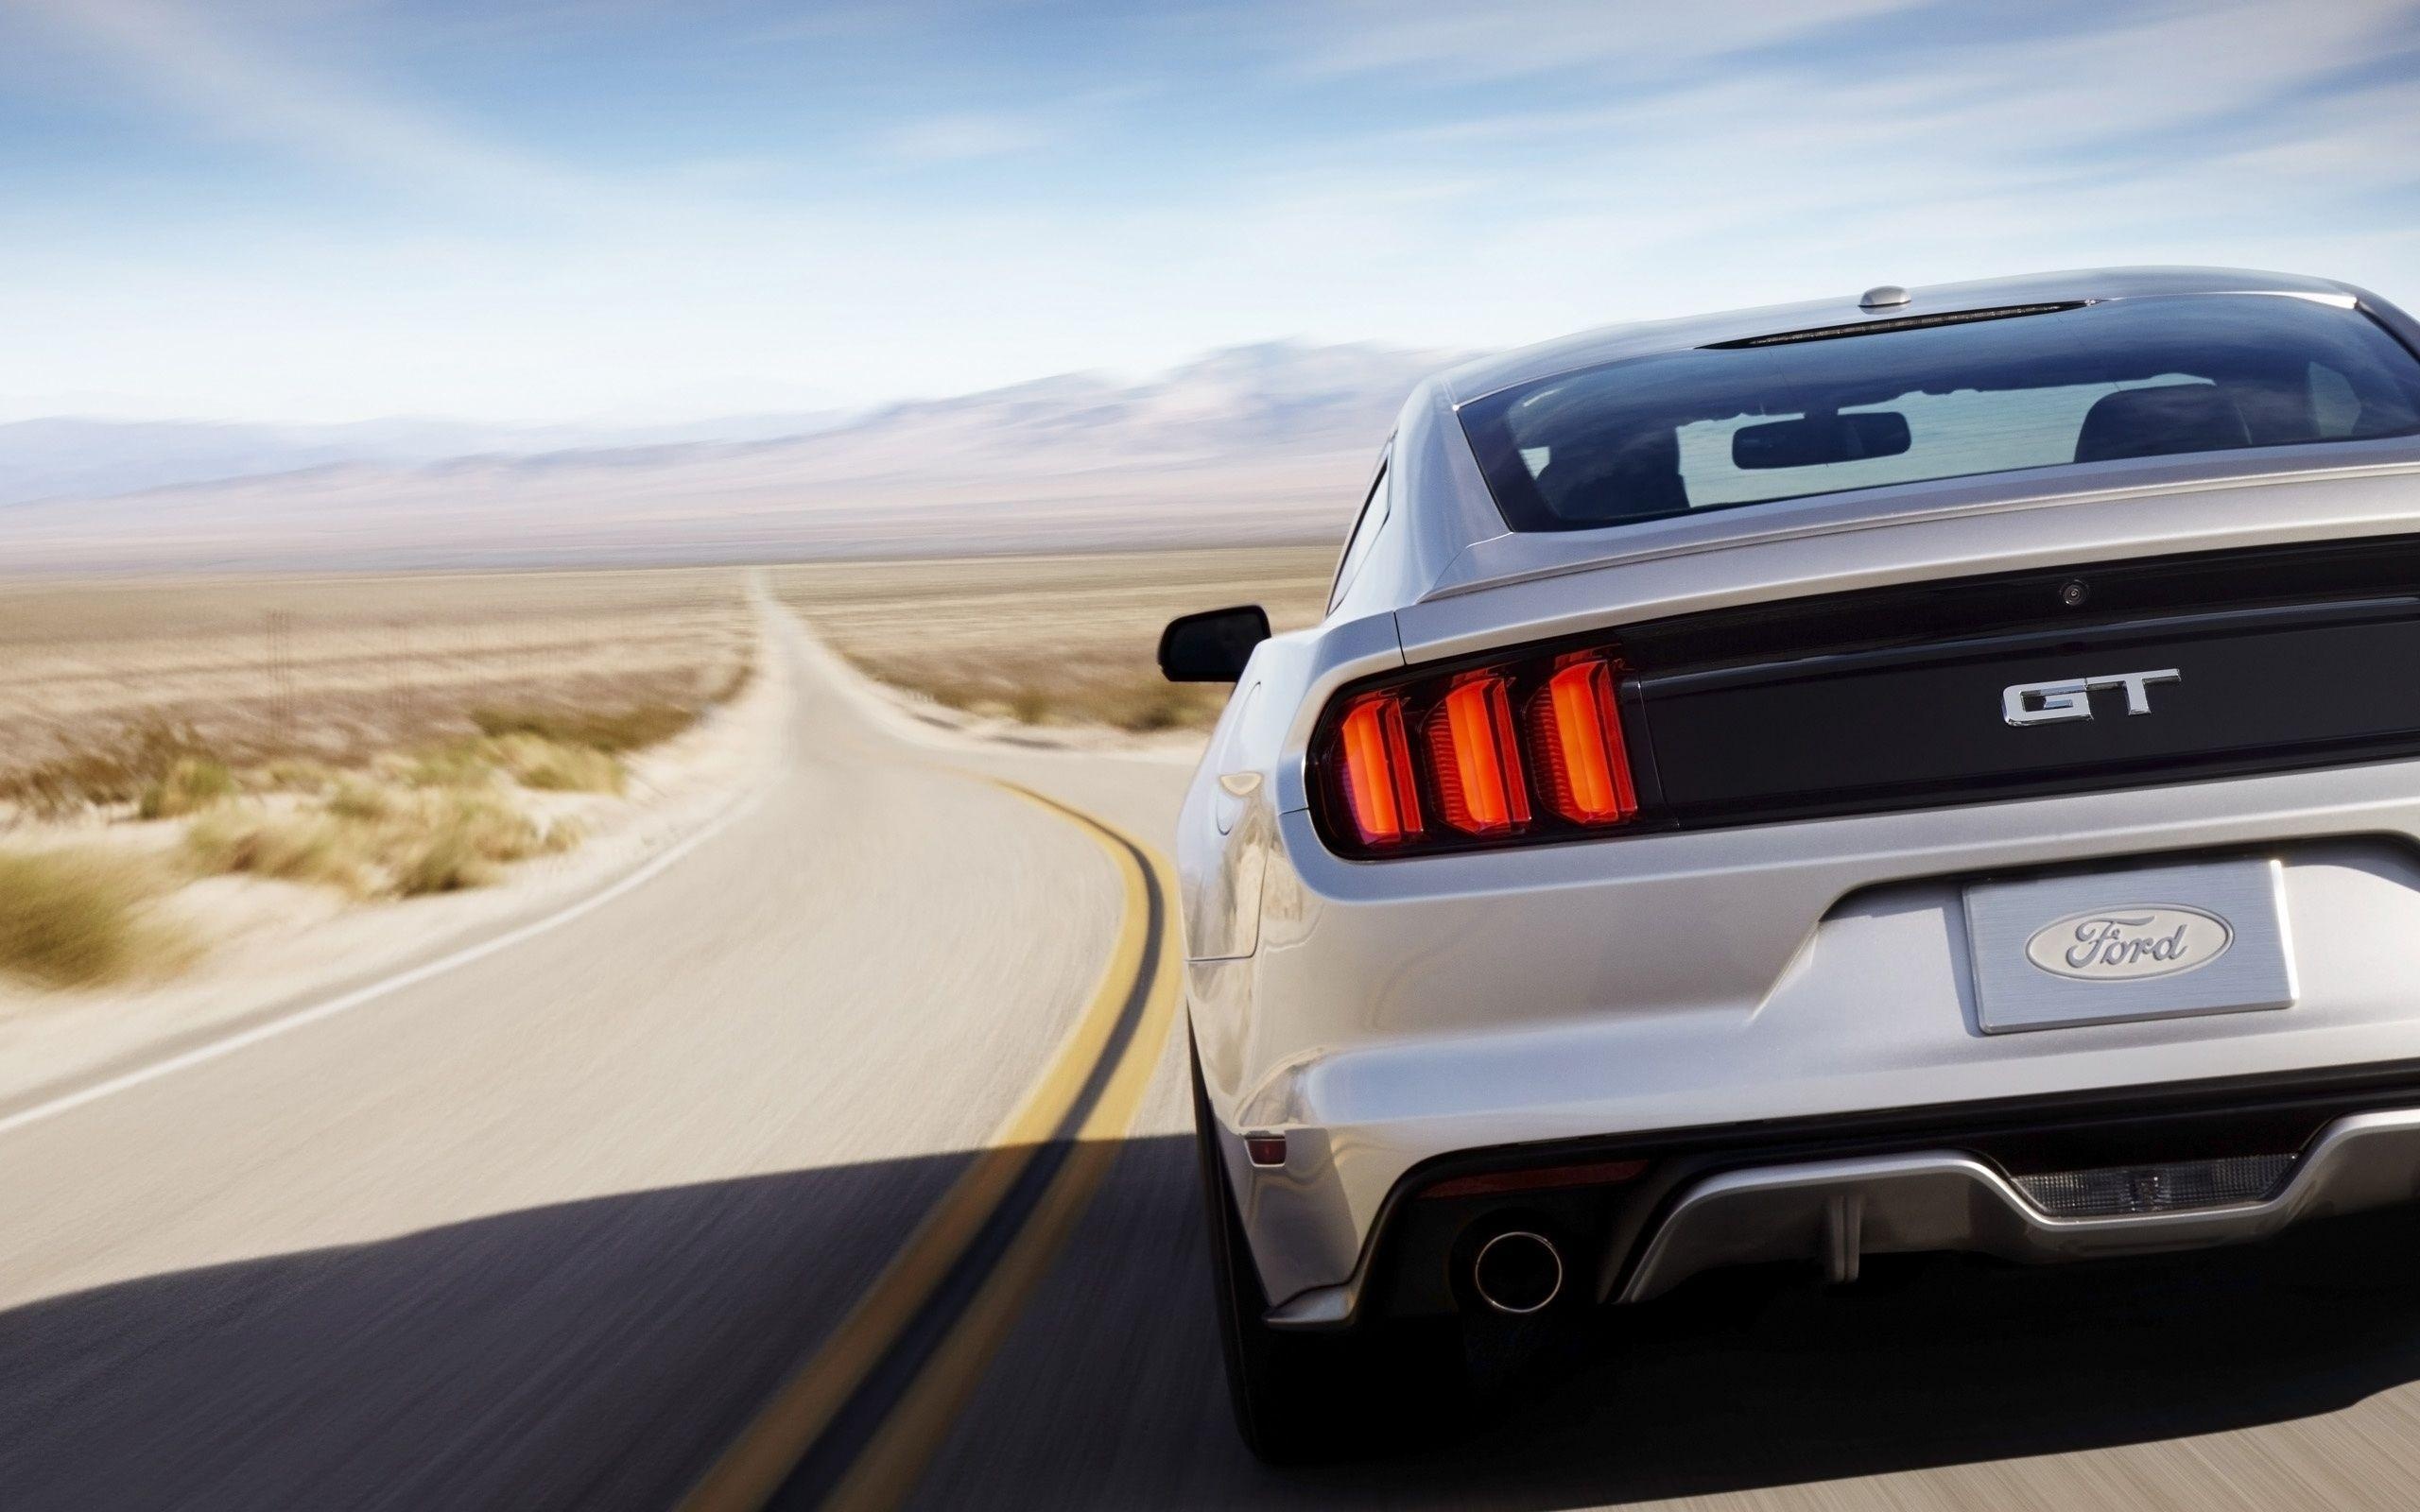 Hd Wallpapers 1080p Cars Mustang 2560x1600